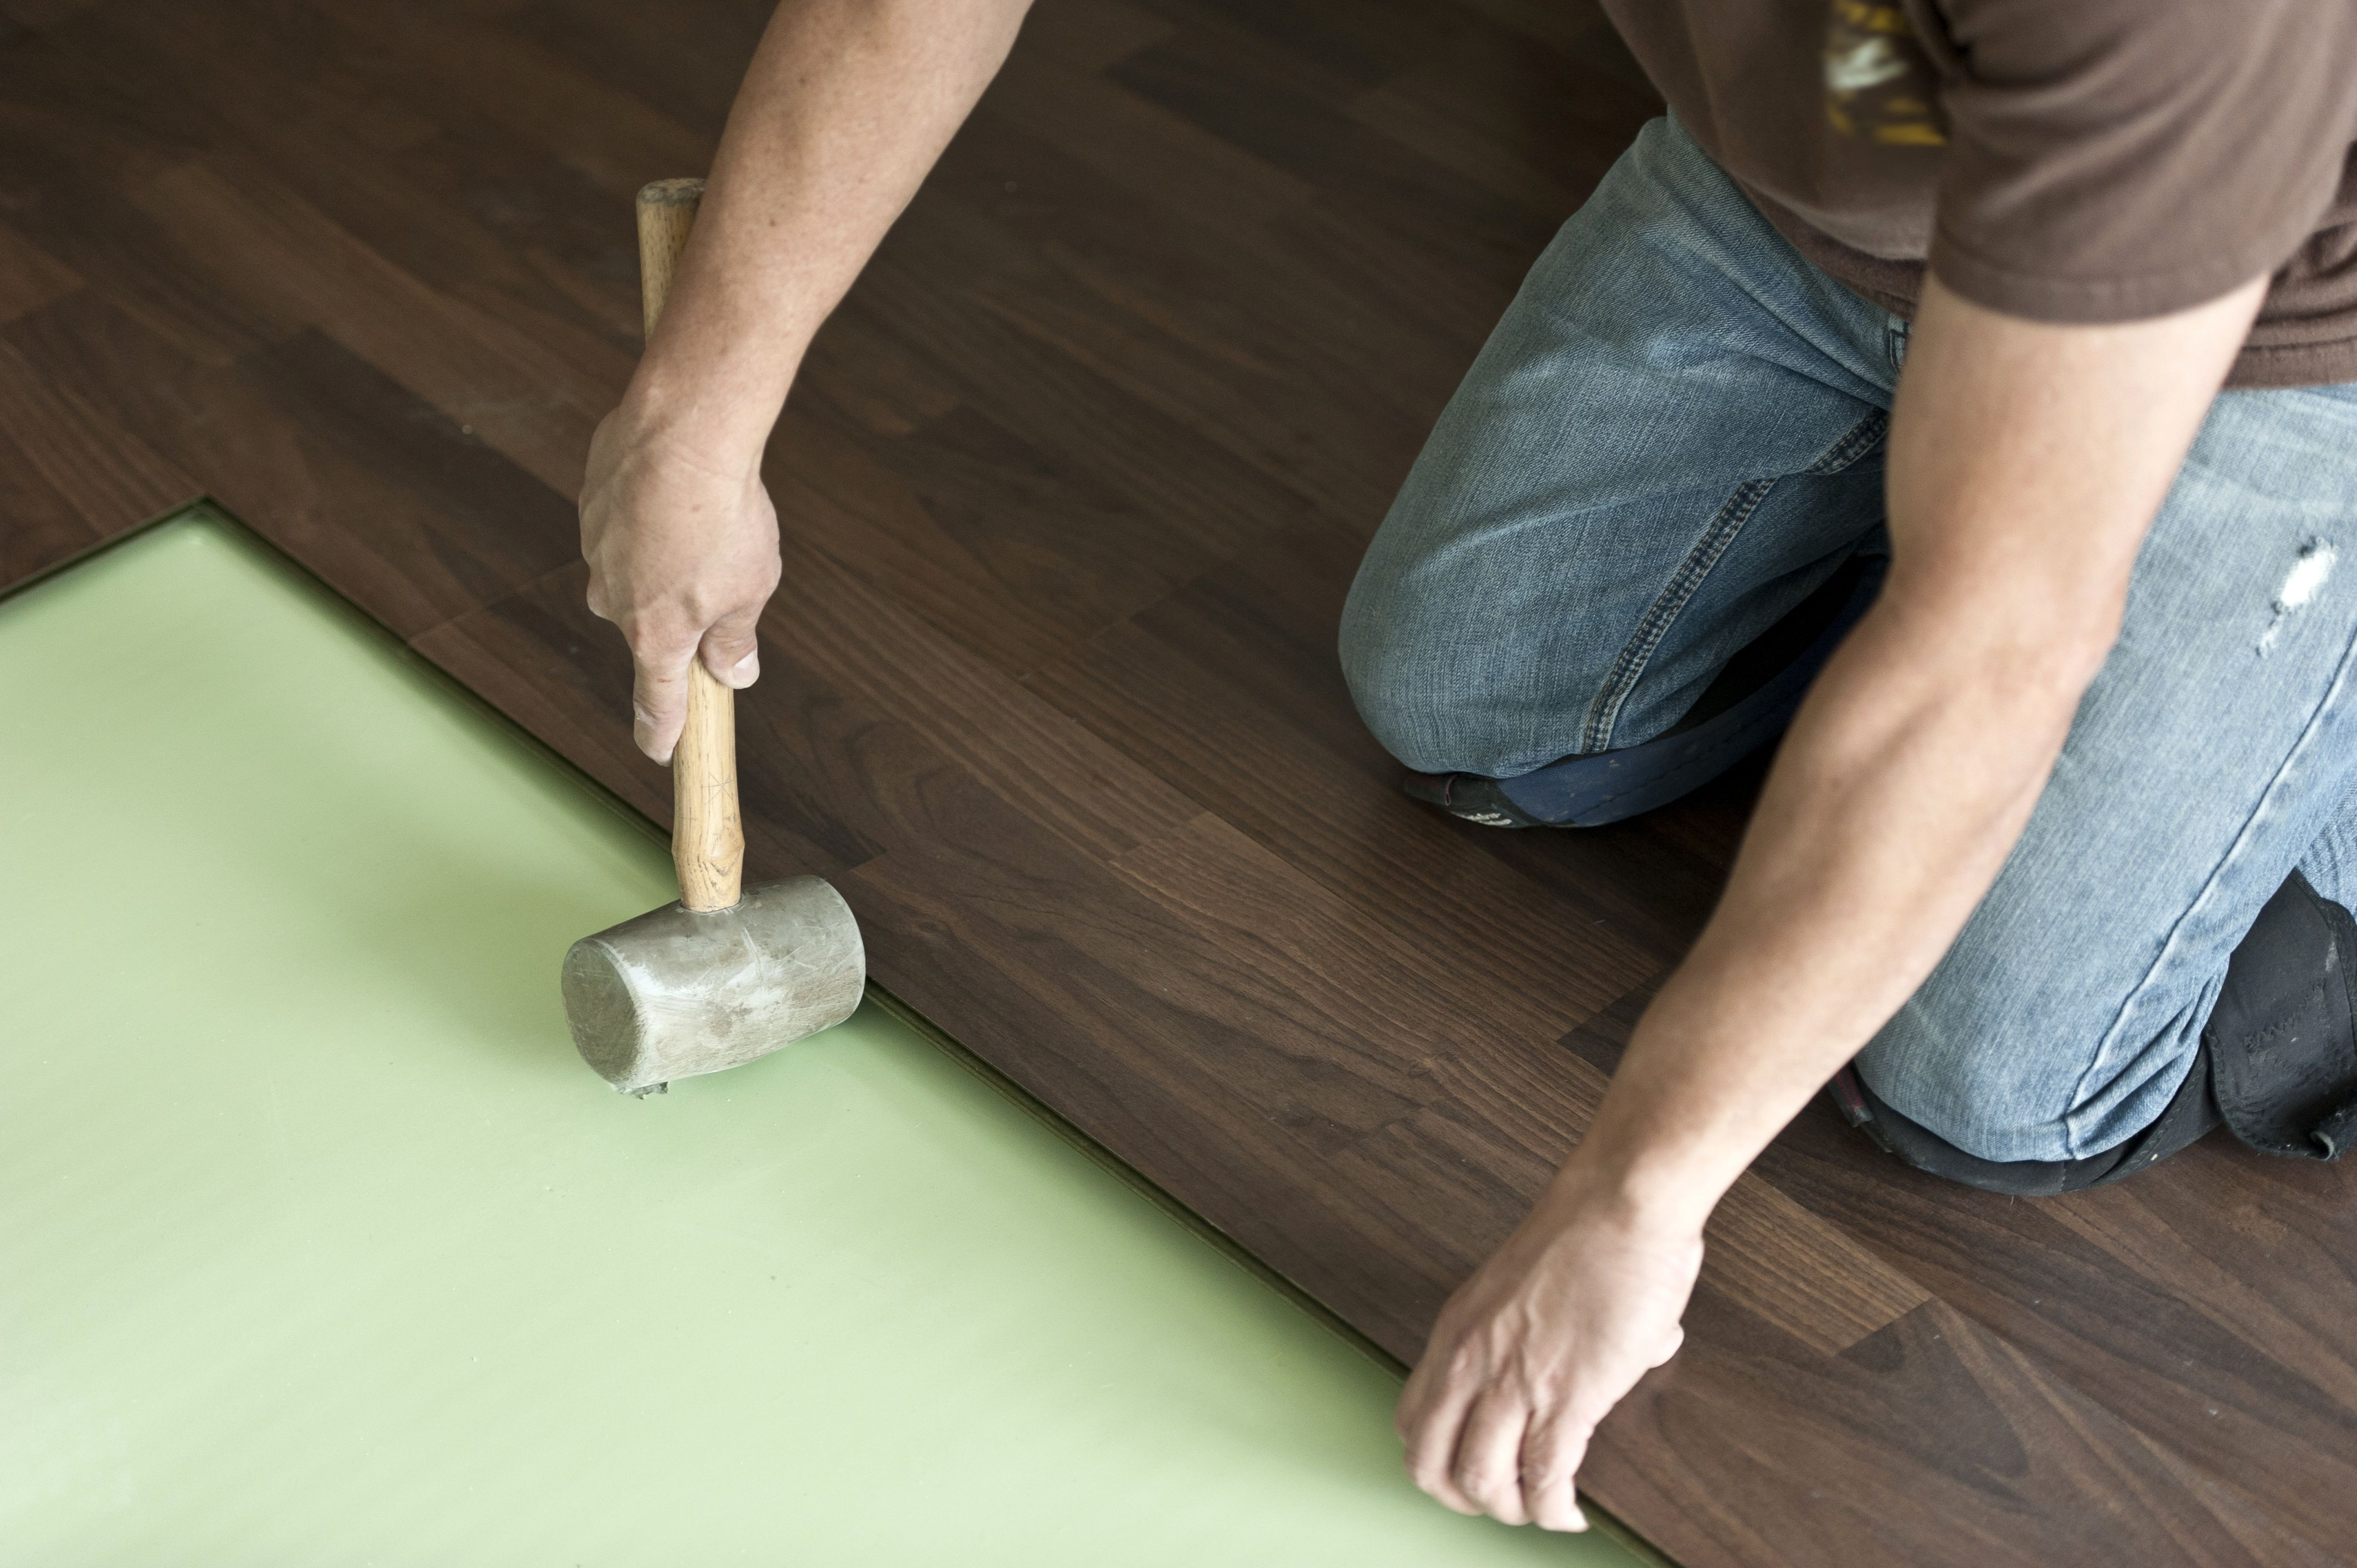 1 1 2 hardwood flooring of can a foam pad be use under solid hardwood flooring with regard to installing hardwood floor 155149312 57e967d45f9b586c35ade84a